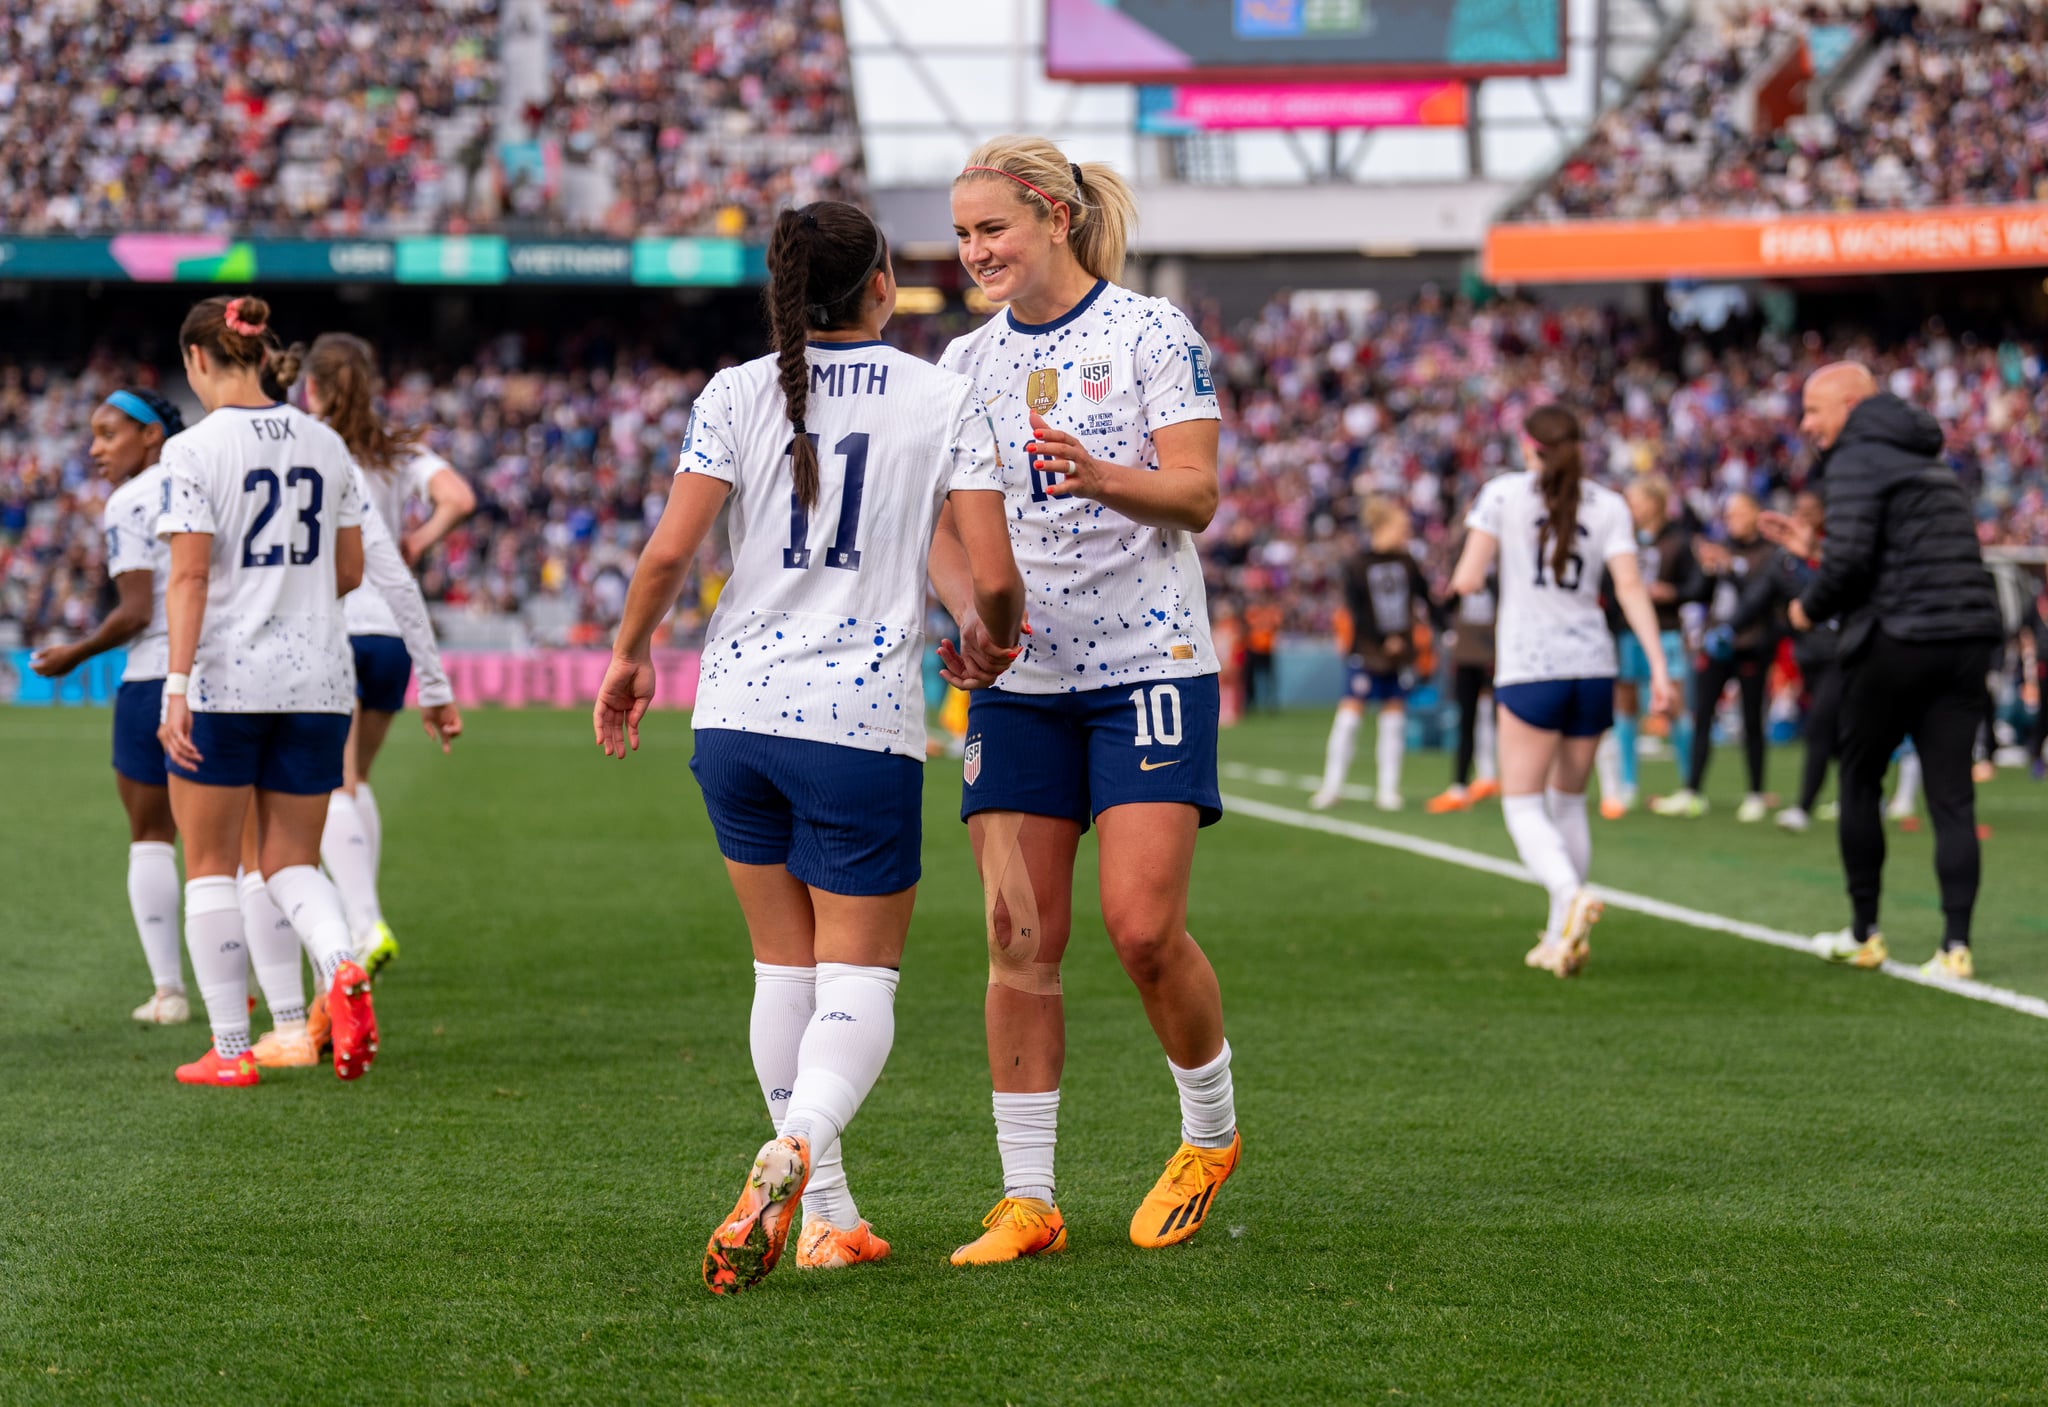 AUCKLAND, NEW ZEALAND - JULY 22: Sophia Smith #11 of the United States celebrates with Lindsey Horan #10  during a FIFA World Cup Group Stage game between Vietnam and USWNT at Eden Park  on July 22, 2023 in Auckland, New Zealand. (Photo by Brad Smith/USSF/Getty Images for USSF).